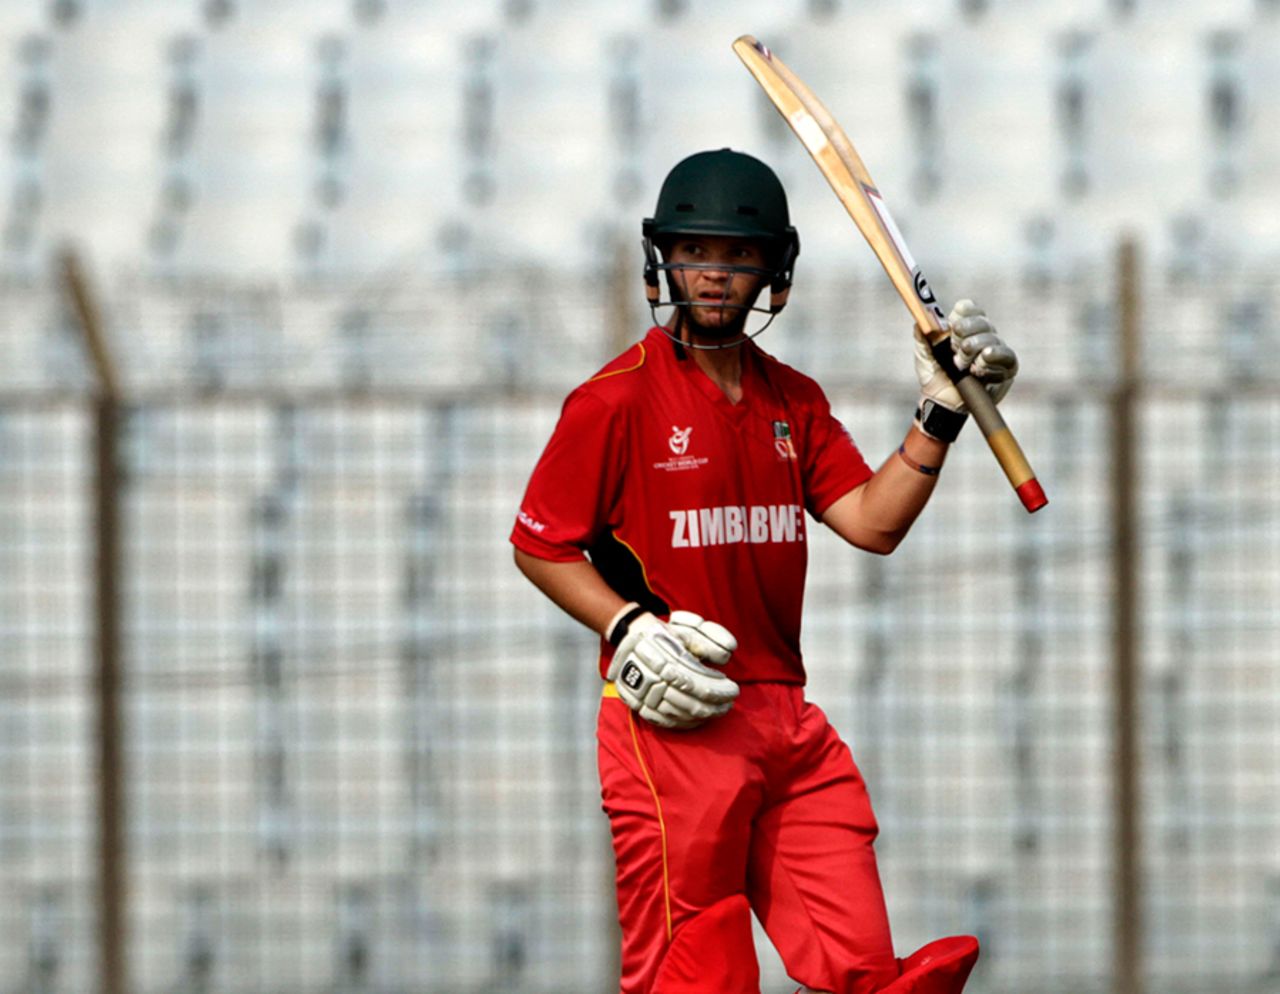 Jeremy Ives provided the sole resistance for Zimbabwe Under-19s with 91, England v Zimbabwe, Under-19 World Cup 2016, Chittagong, January 31, 2016